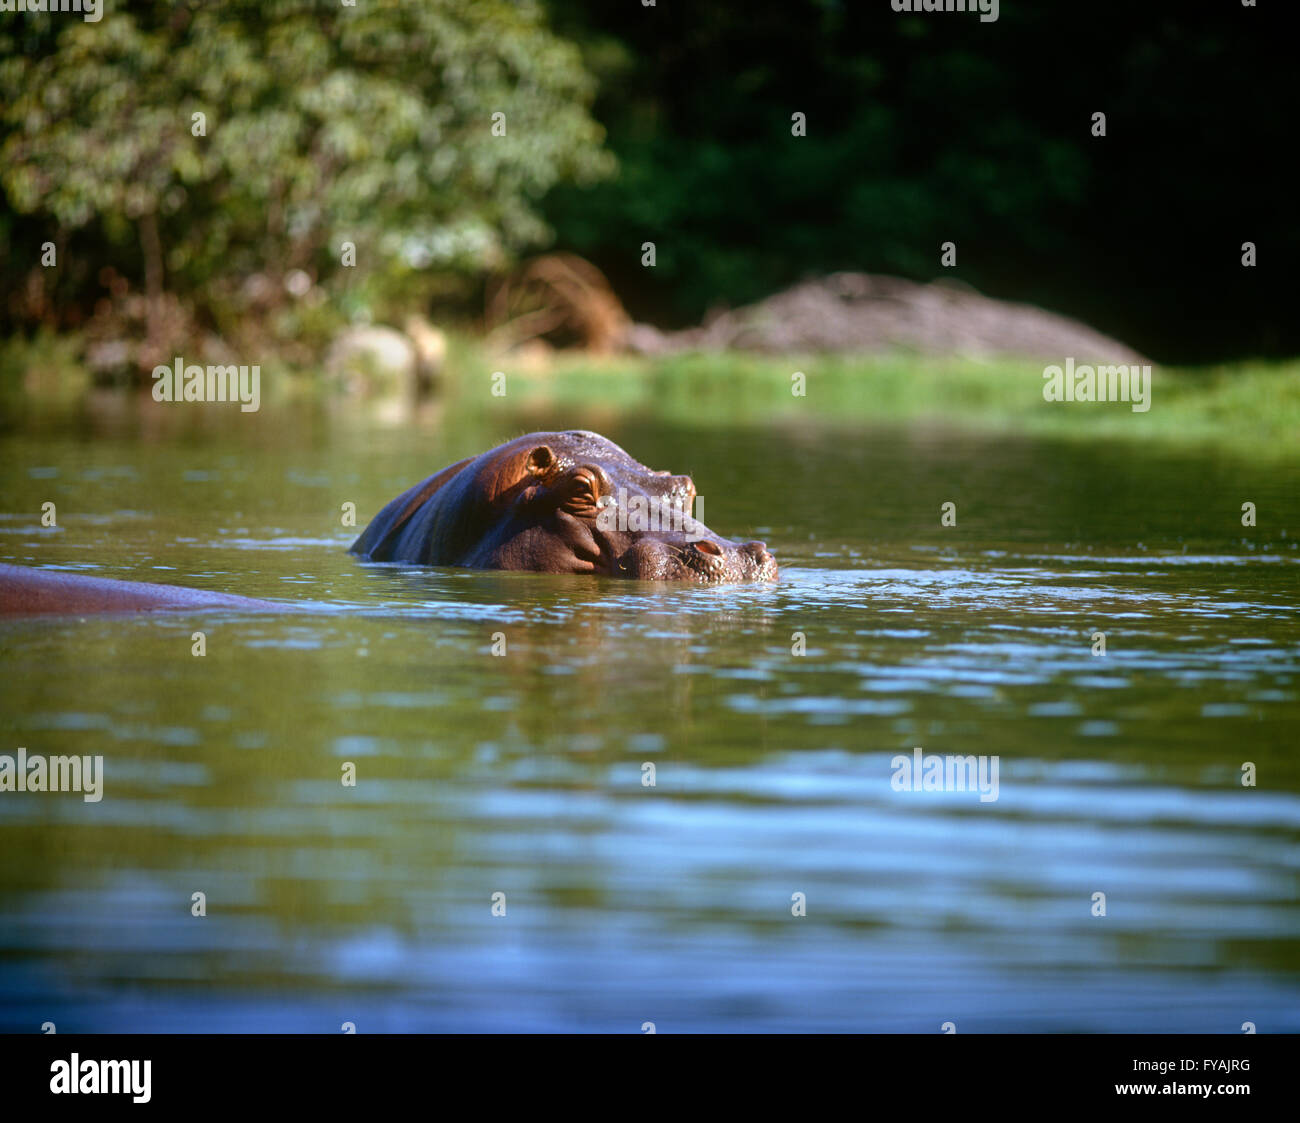 Hippopotamus peeping out of the water in the river, outside. Stock Photo